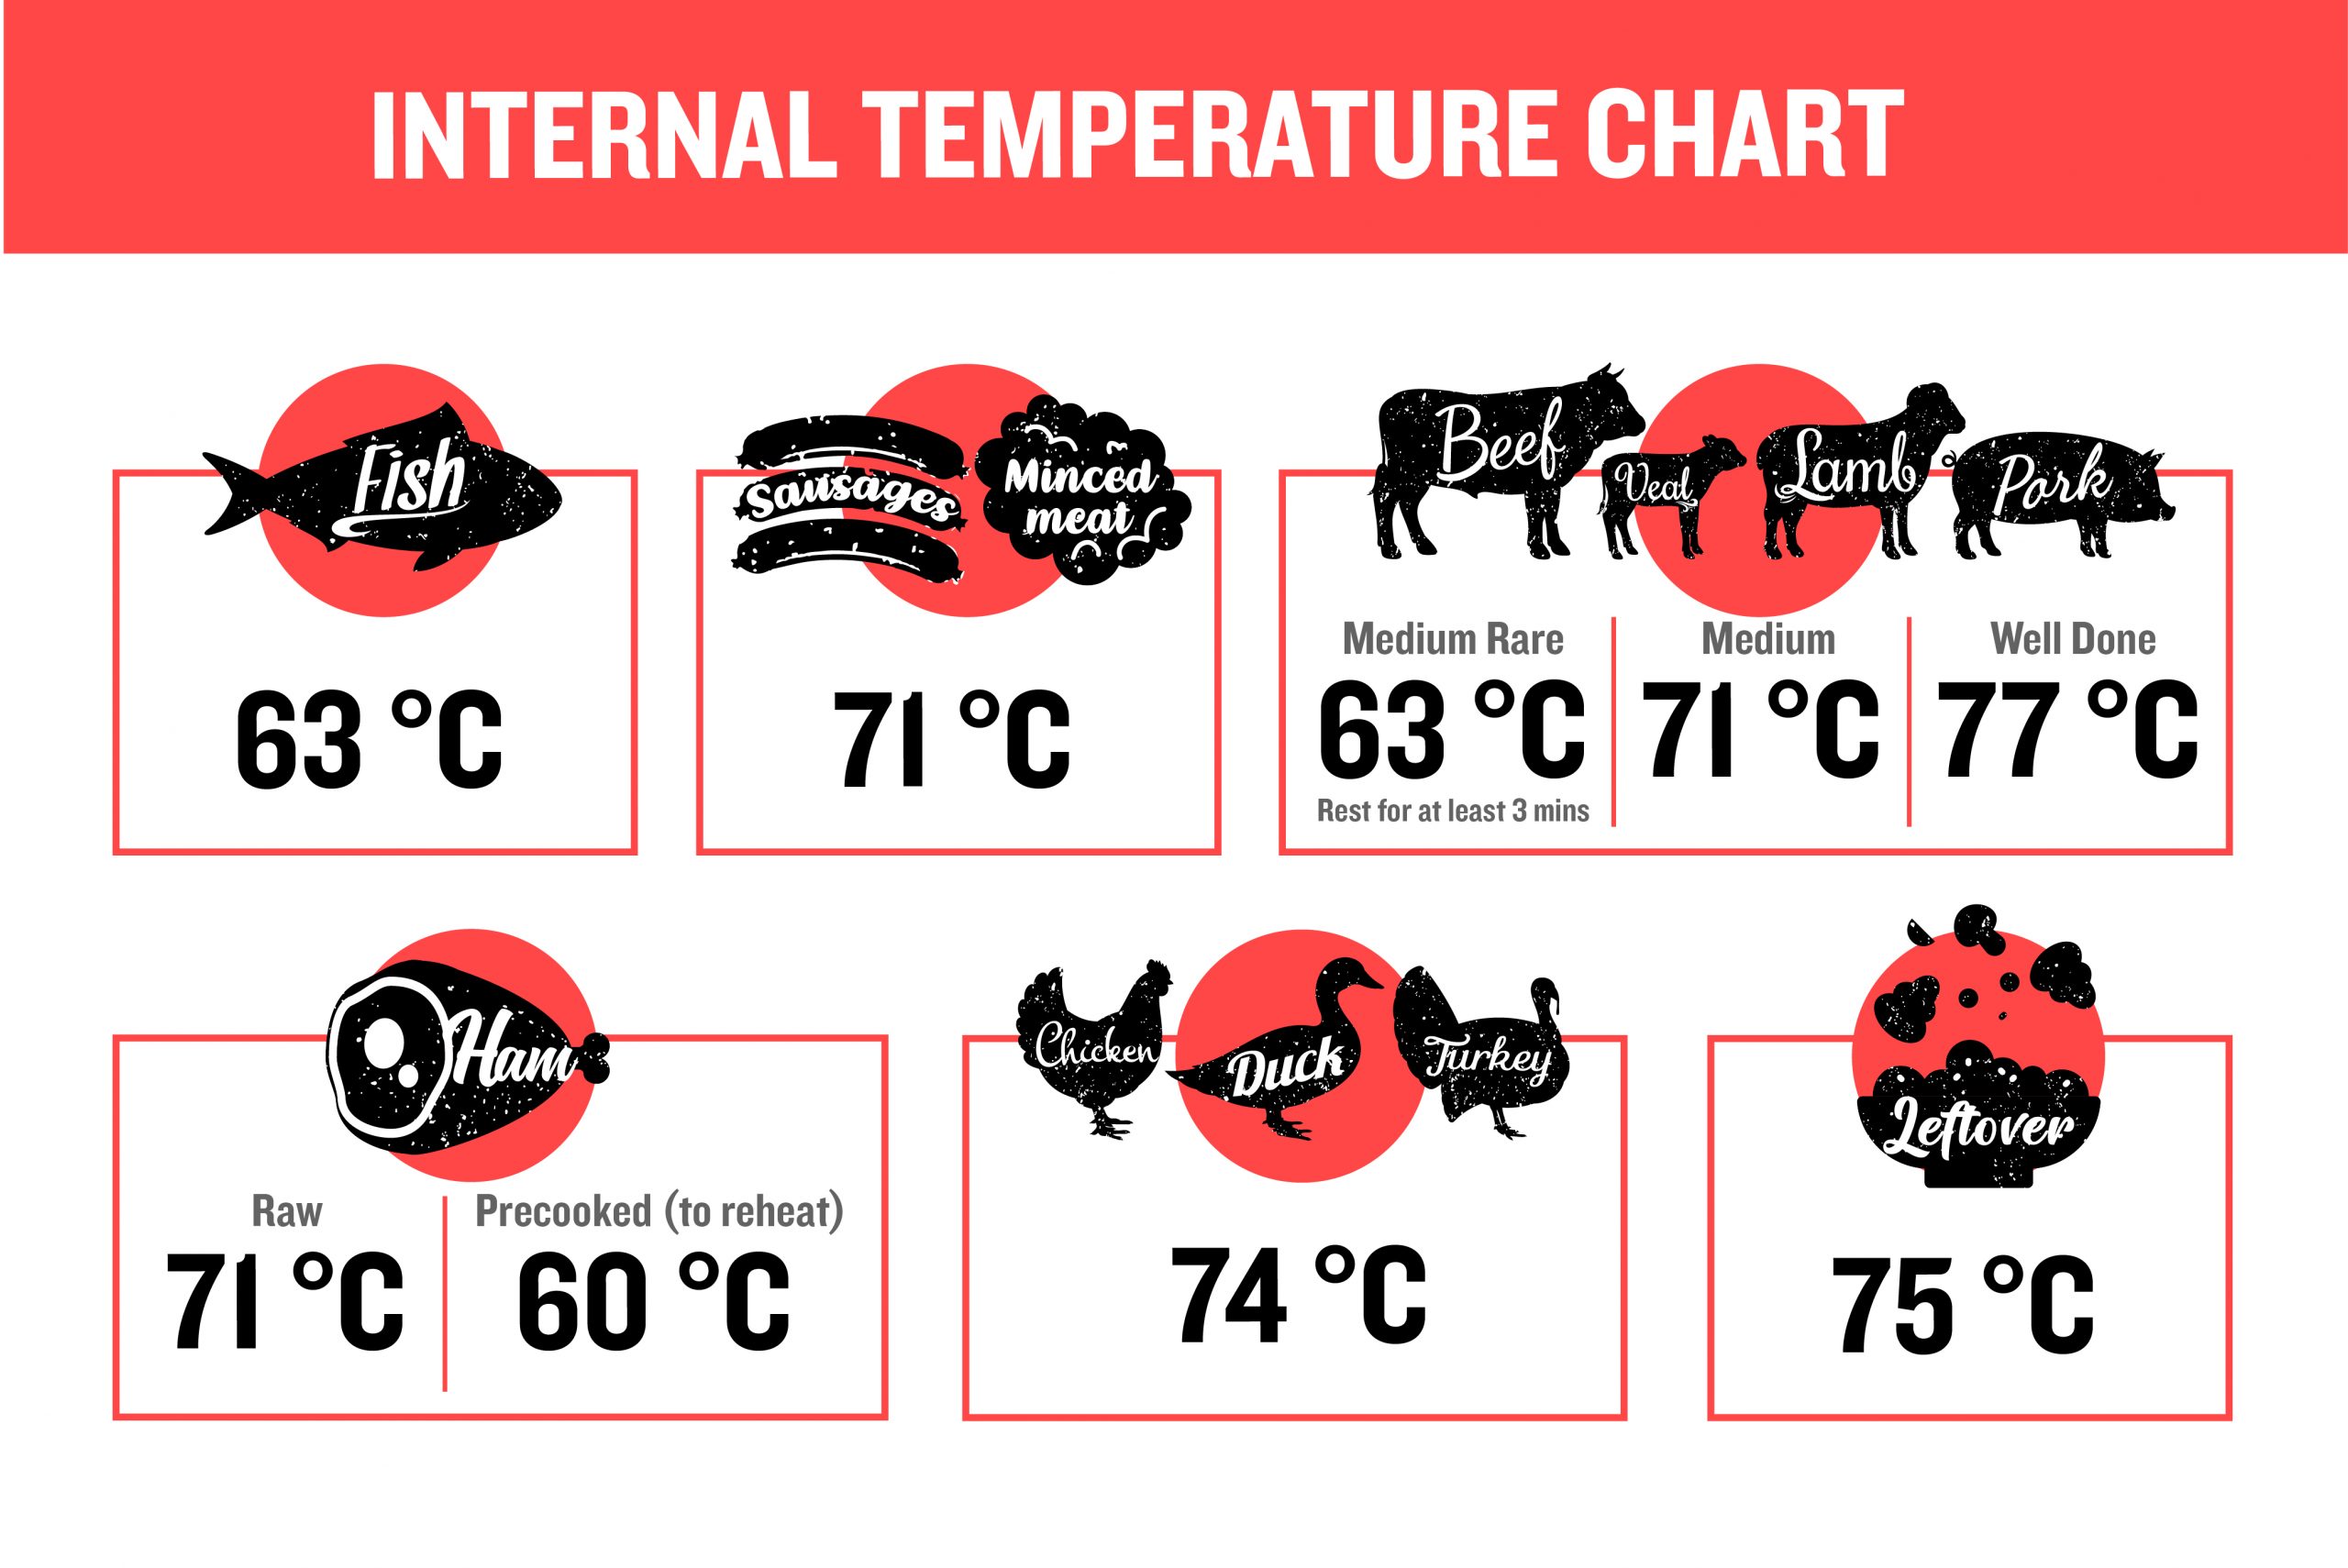 https://asianinspirations.com.au/wp-content/uploads/2020/11/20201123-Meat-Heat-The-Importance-of-Cooking-Temperatures_Internal-Temperature-Chart-02-02-02-1-scaled.jpg